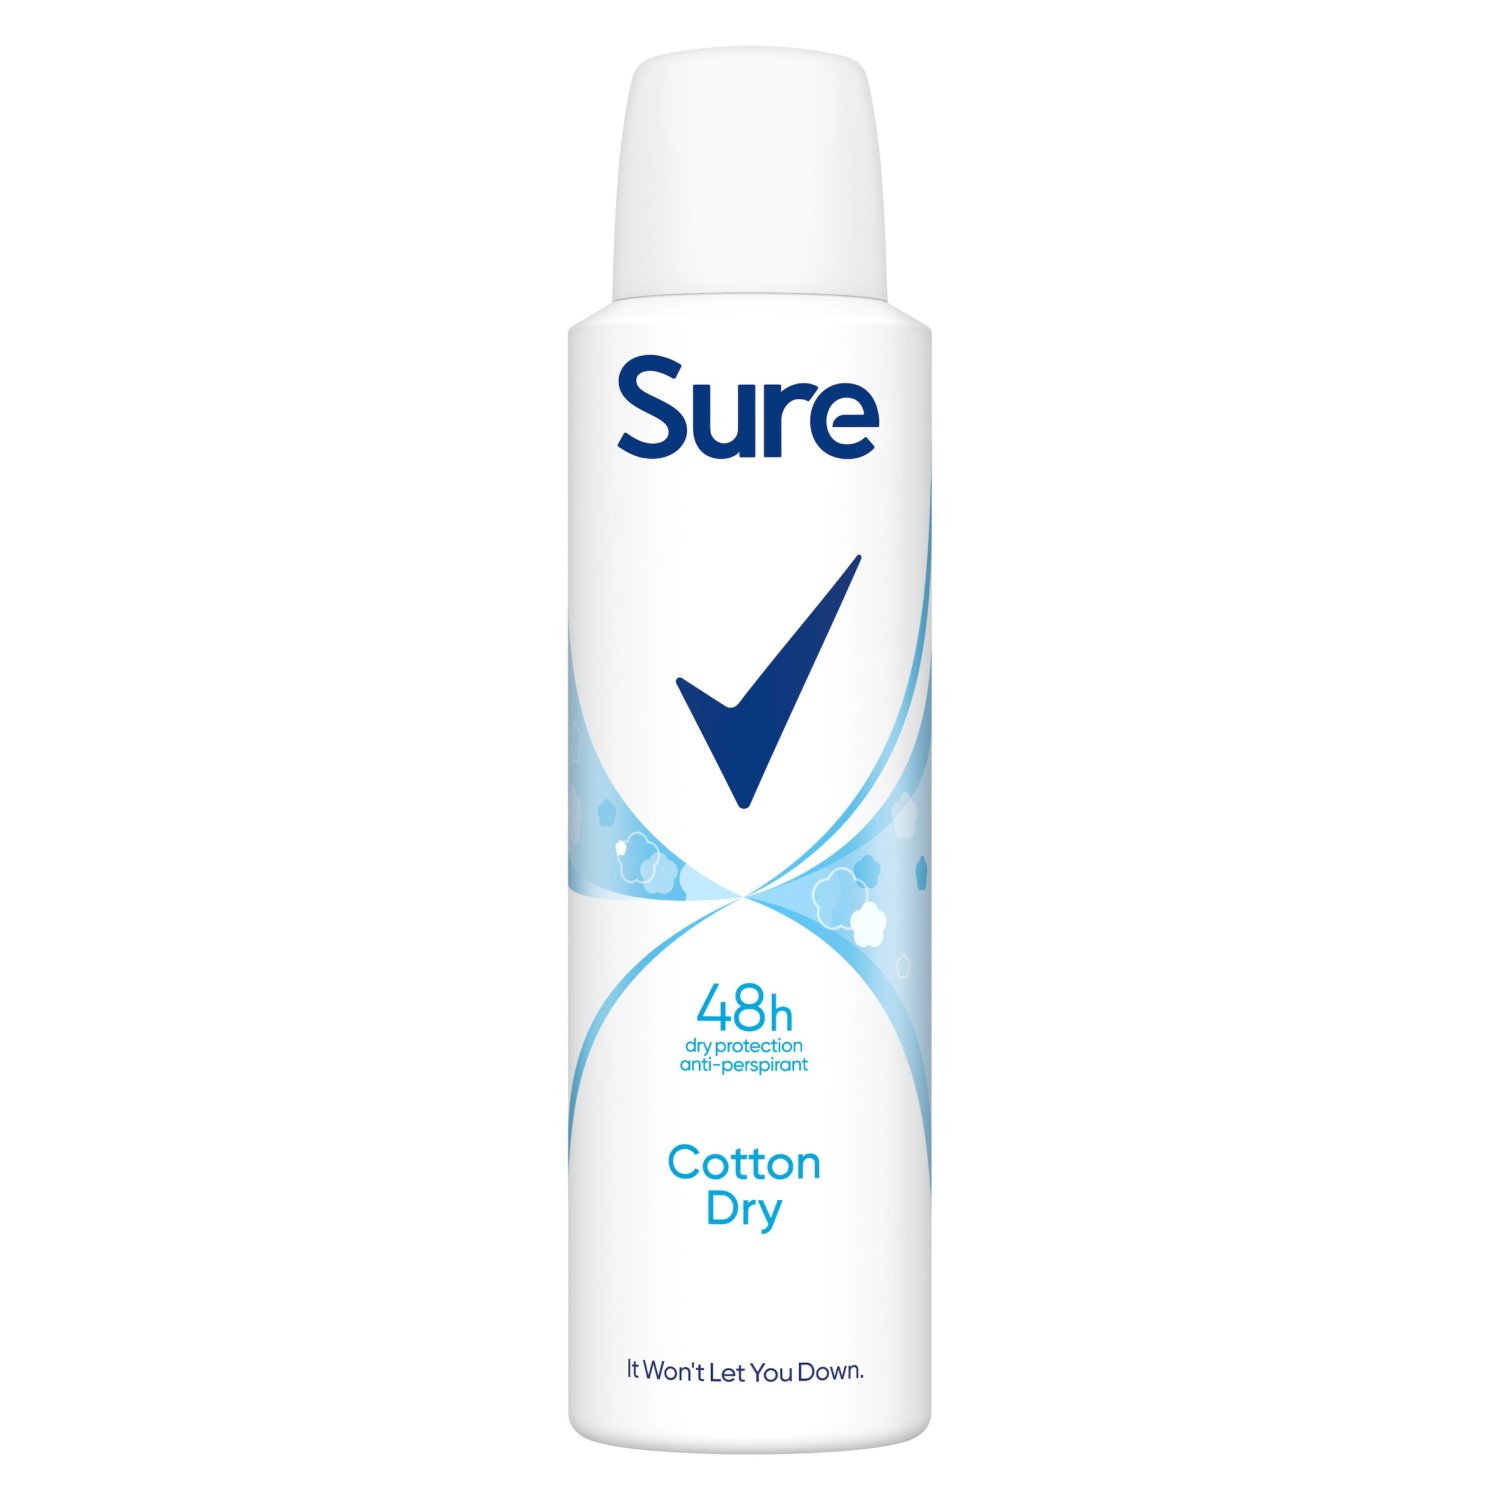 Sure Cotton Dry Anti-perspirant Deodorant Aerosol 150 ml is designed to provide 48-hour protection against sweat and odour with an alcohol-free* formula, so you can feel fresh, dry and protected all day long without irritation. This anti-perspirant deodorant spray has a light, clean fragrance inspired by fresh cotton sheets, so you can have the confidence to keep moving all day long whilst feeling fresh and dry. That soft, fresh scent of cotton stays with you no matter how hard you push yourself. Sure Cotton Dry anti-perspirant deodorant contains Sure’s innovative MotionSense technology which releases a burst of clean, fresh fragrance when you need it most. It works like this: unique microcapsules sit on the surface of your skin. When you move, friction breaks the microcapsules releasing more fragrance. So, the more you move, the more it protects. Get all-day freshness and 48 hour protection morning to night with Sure Cotton Dry Anti-Perspirant Deodorant Aerosol to keep sweat and odour at bay. When you work hard, Sure works harder. Sure. It won’t let you down. How to use: Firstly, shake the anti-perspirant deodorant can. Then hold it 15 centimetres away from your underarm and spray evenly in a well-ventilated area. Avoid contact with eyes and broken skin. *ethyl alcohol